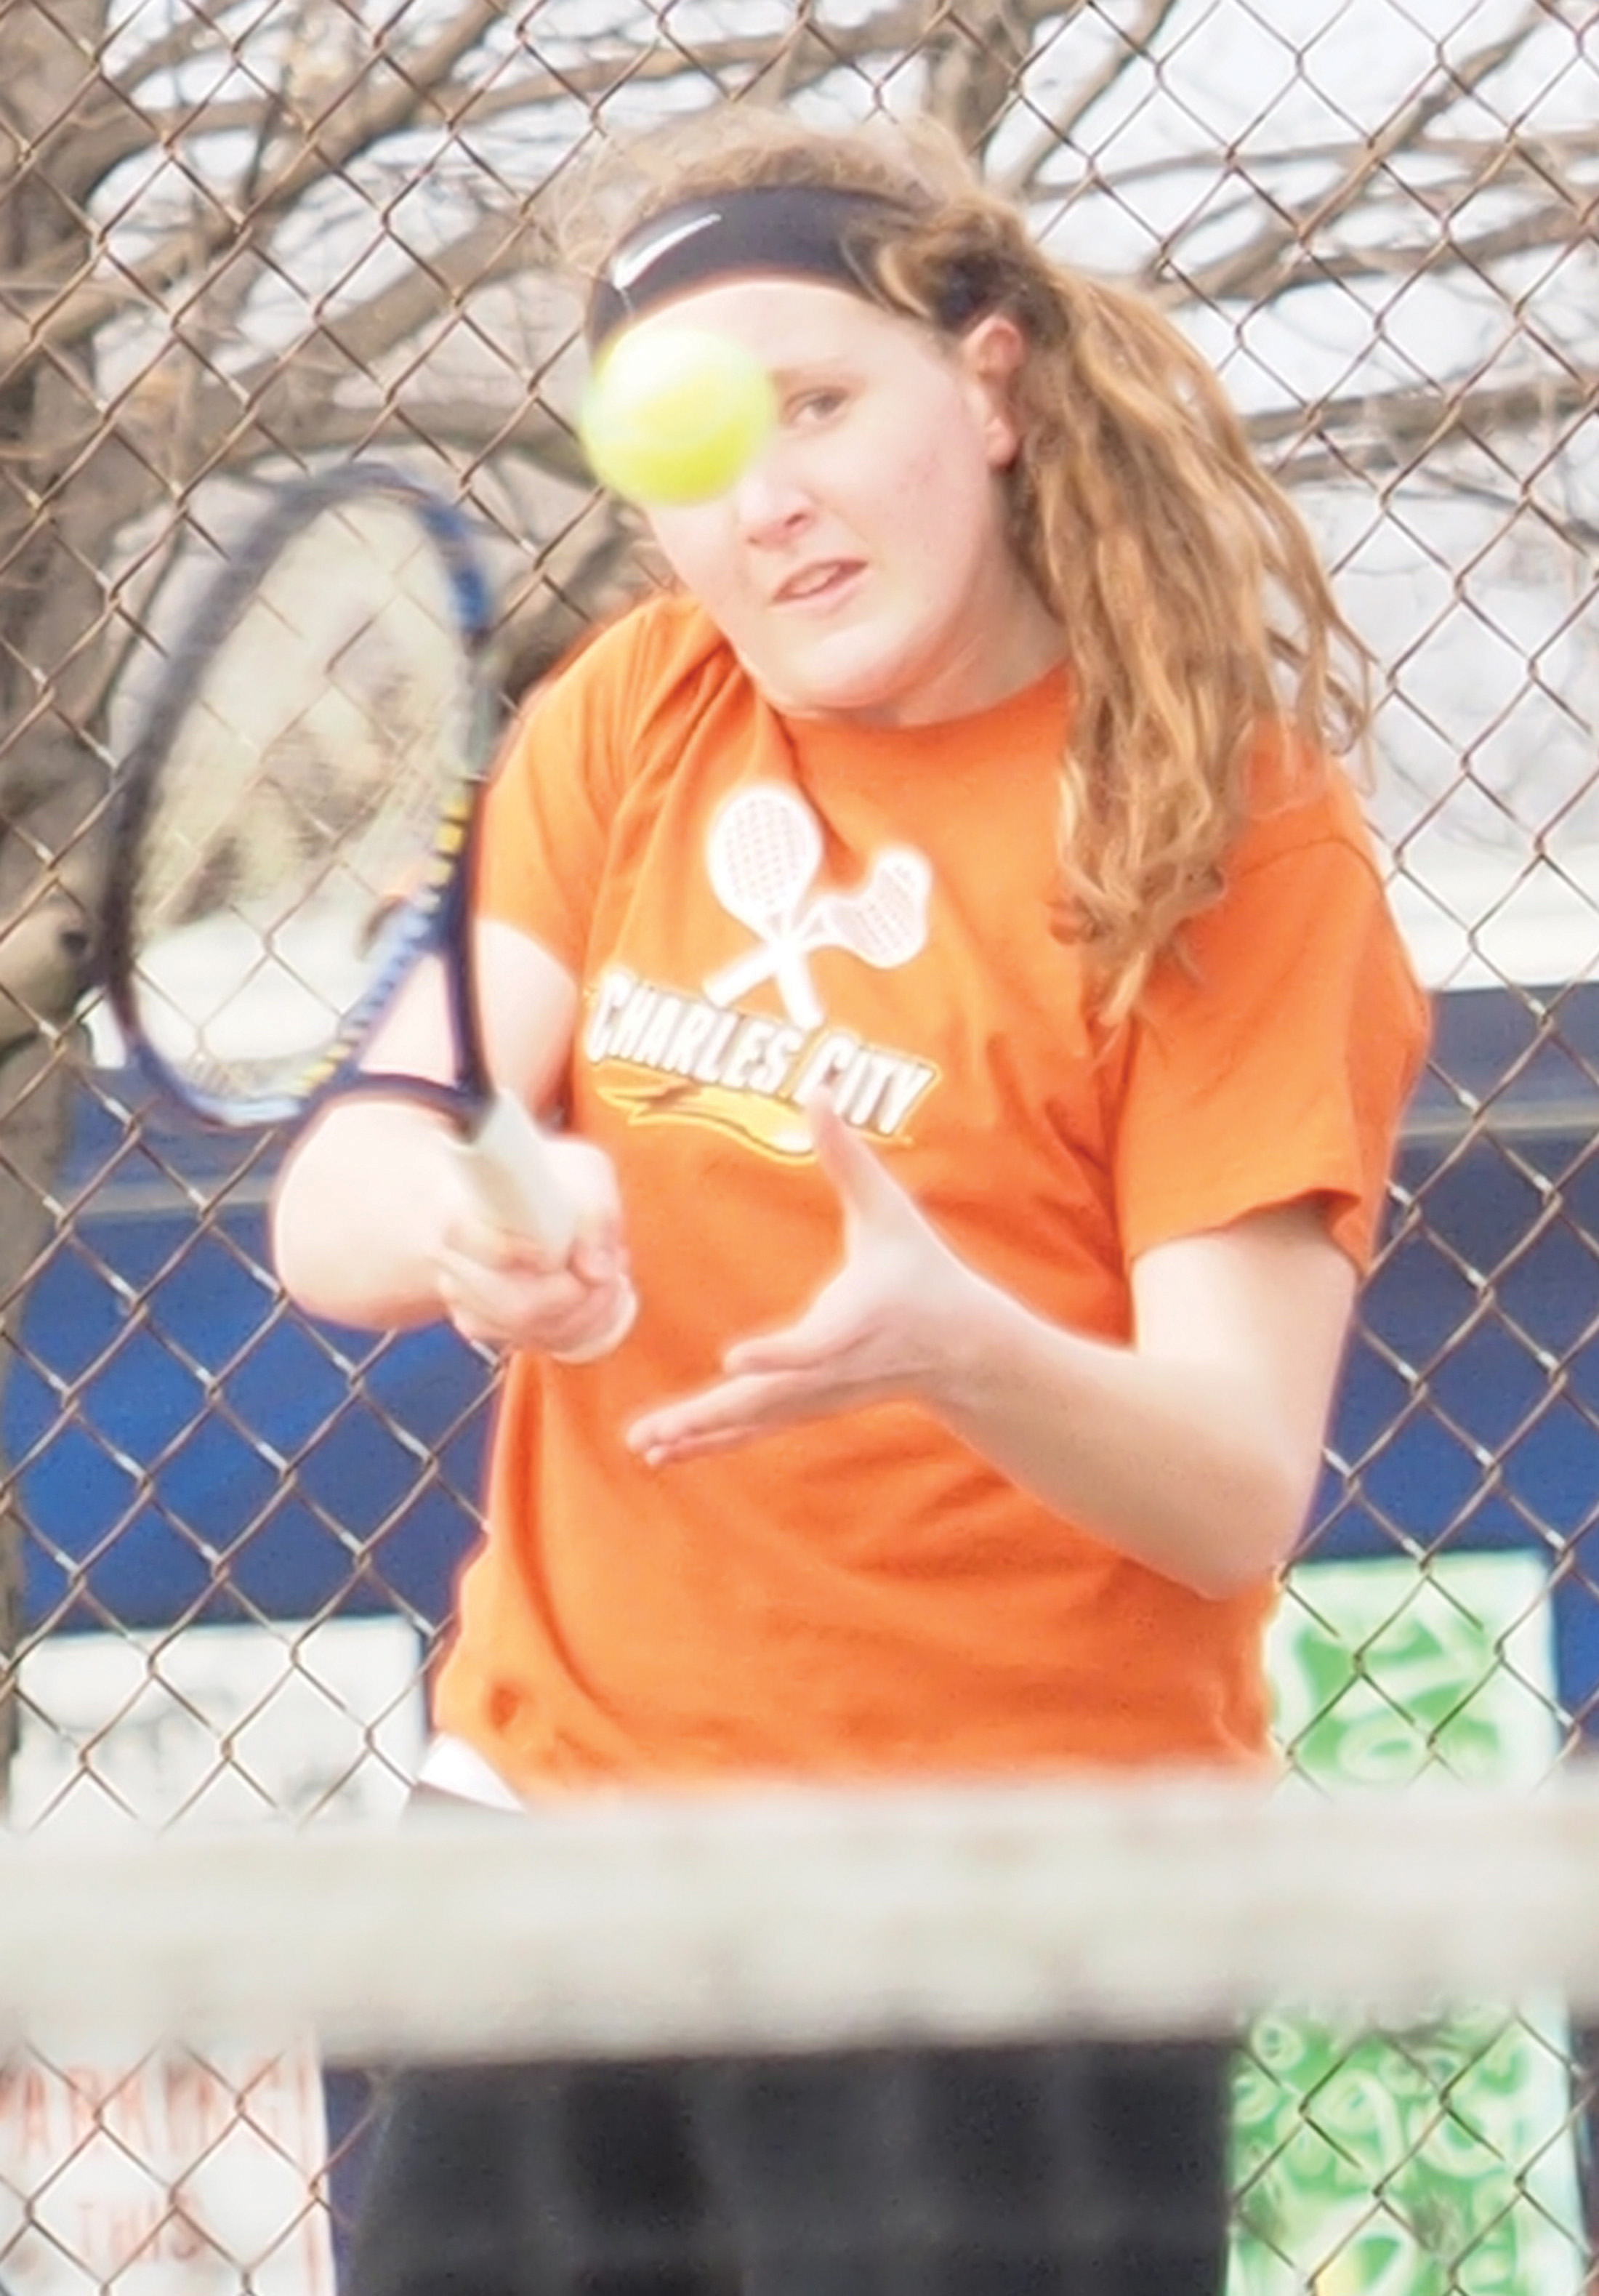 Sindlinger earns 2 No. 1 tennis match wins in Comets’ 6-3 loss to DNH